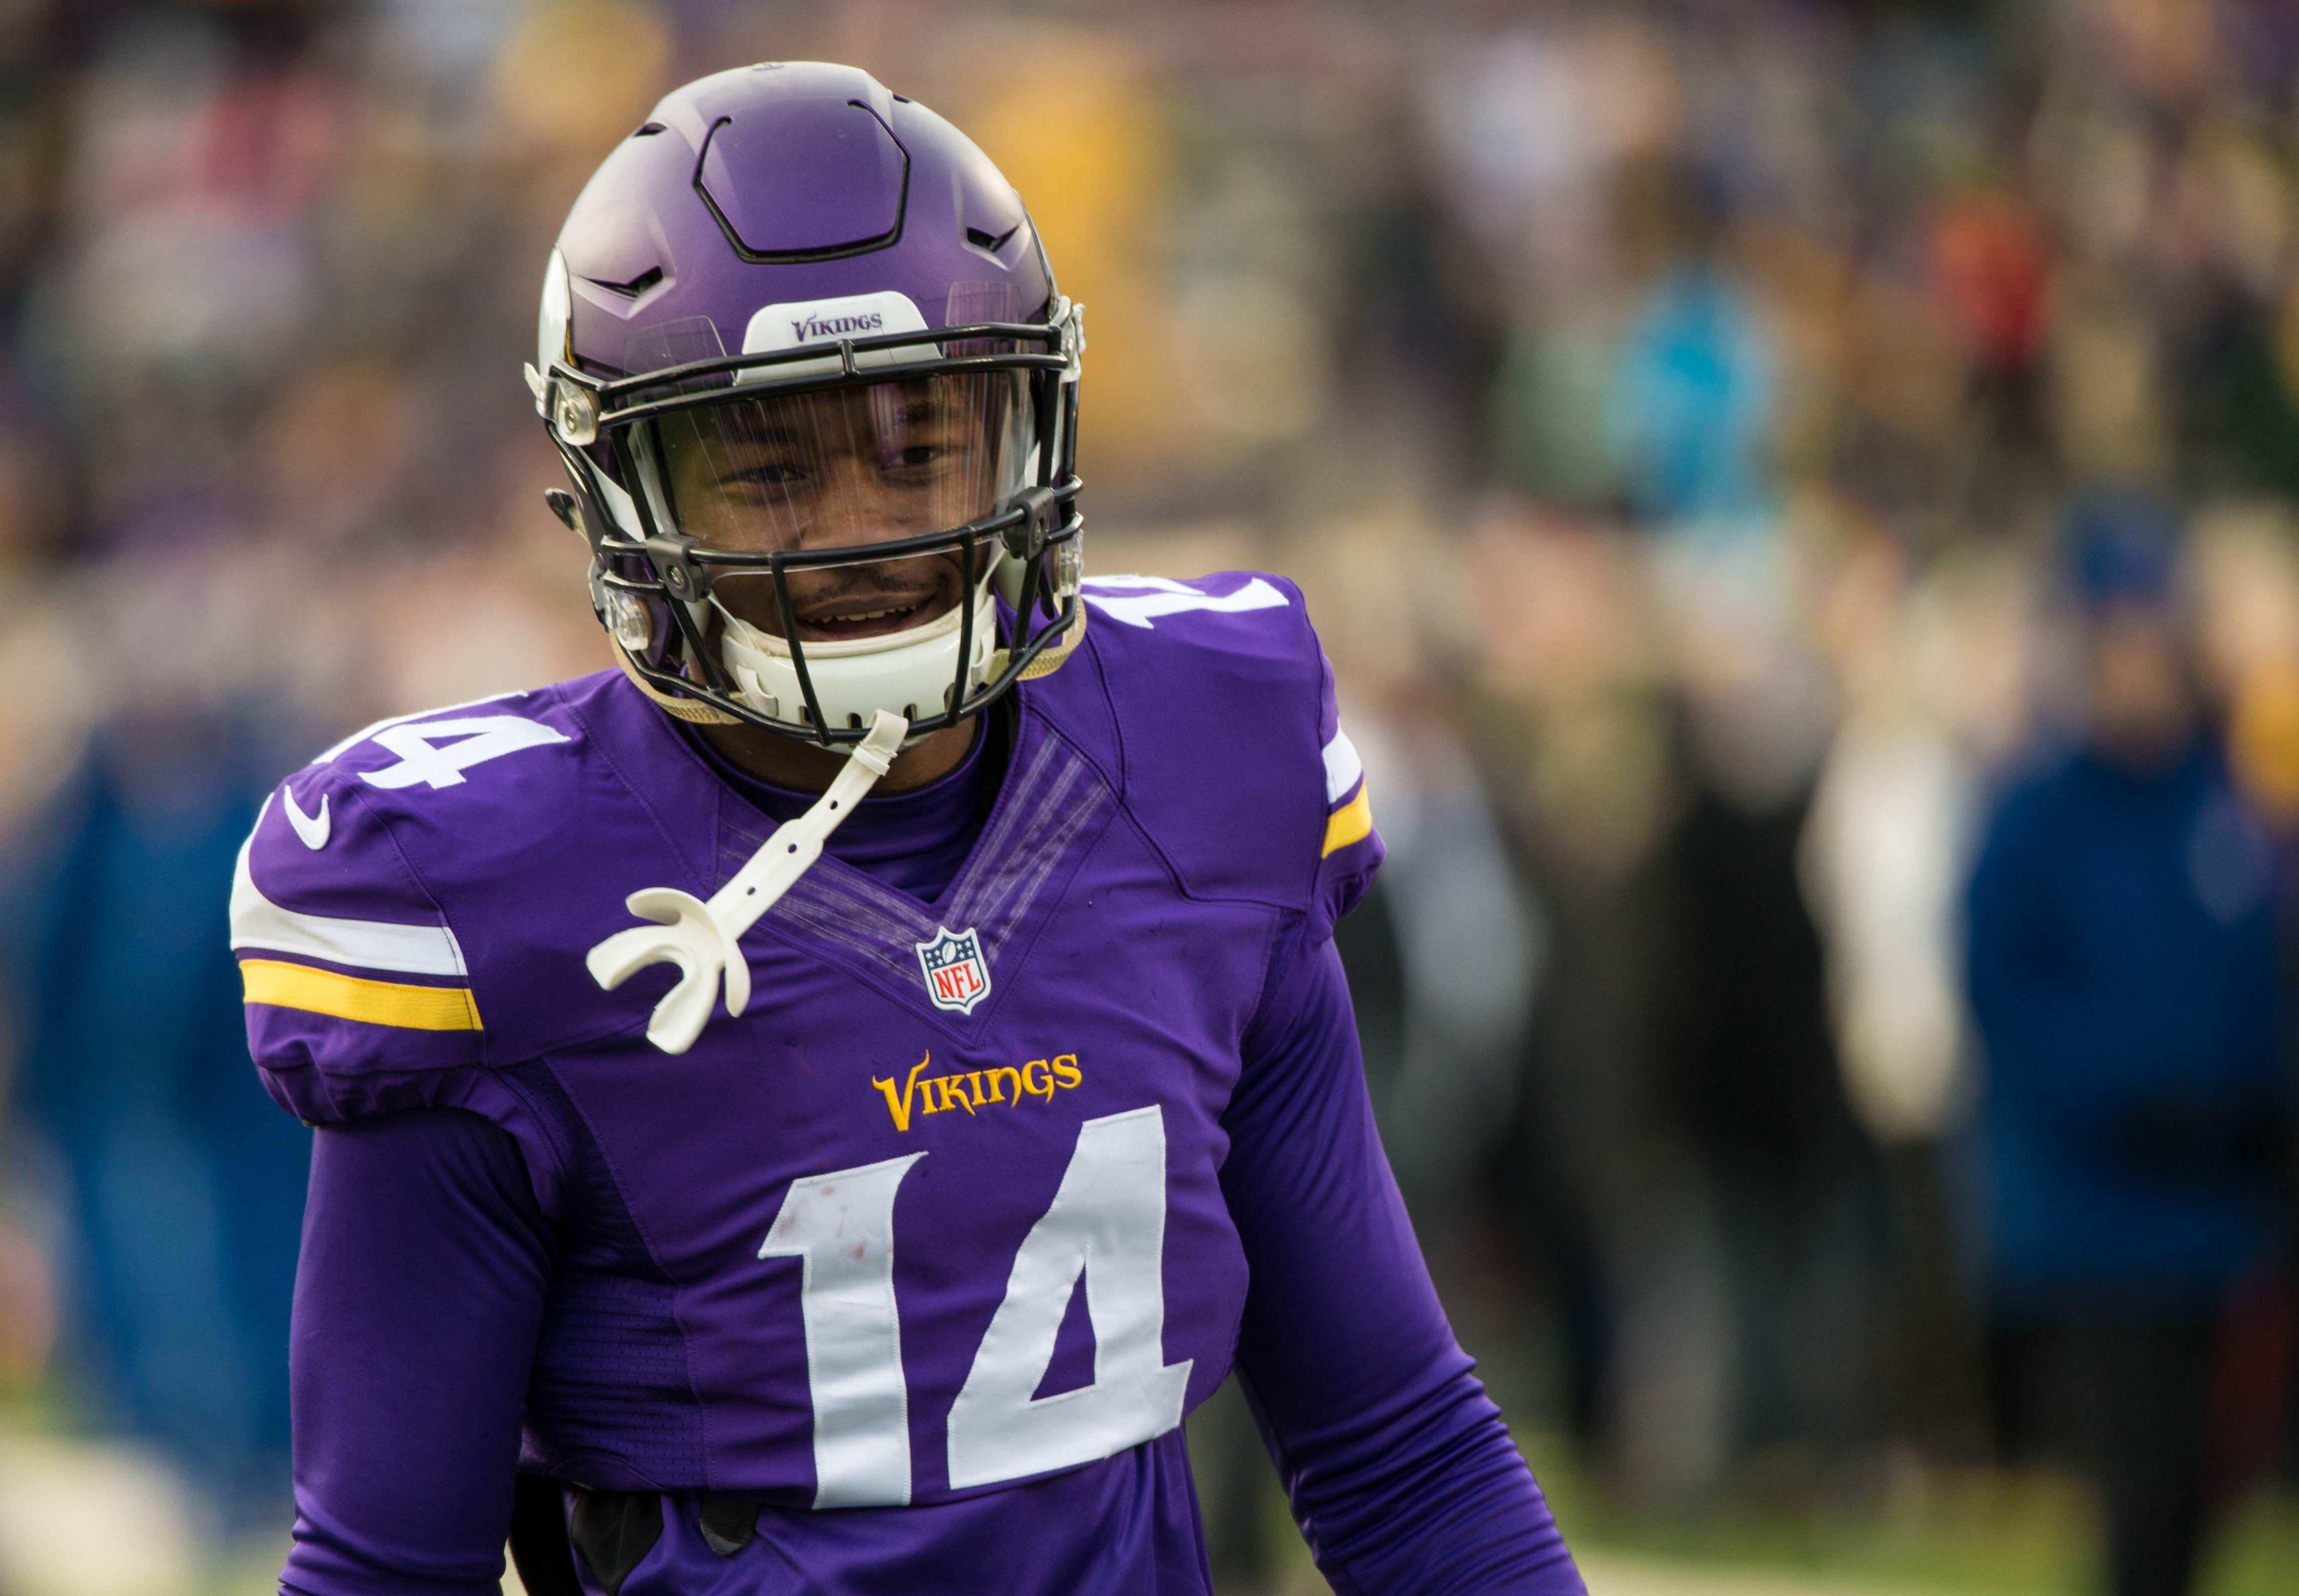 At his current pace, Stefon Diggs is poised for a monster season